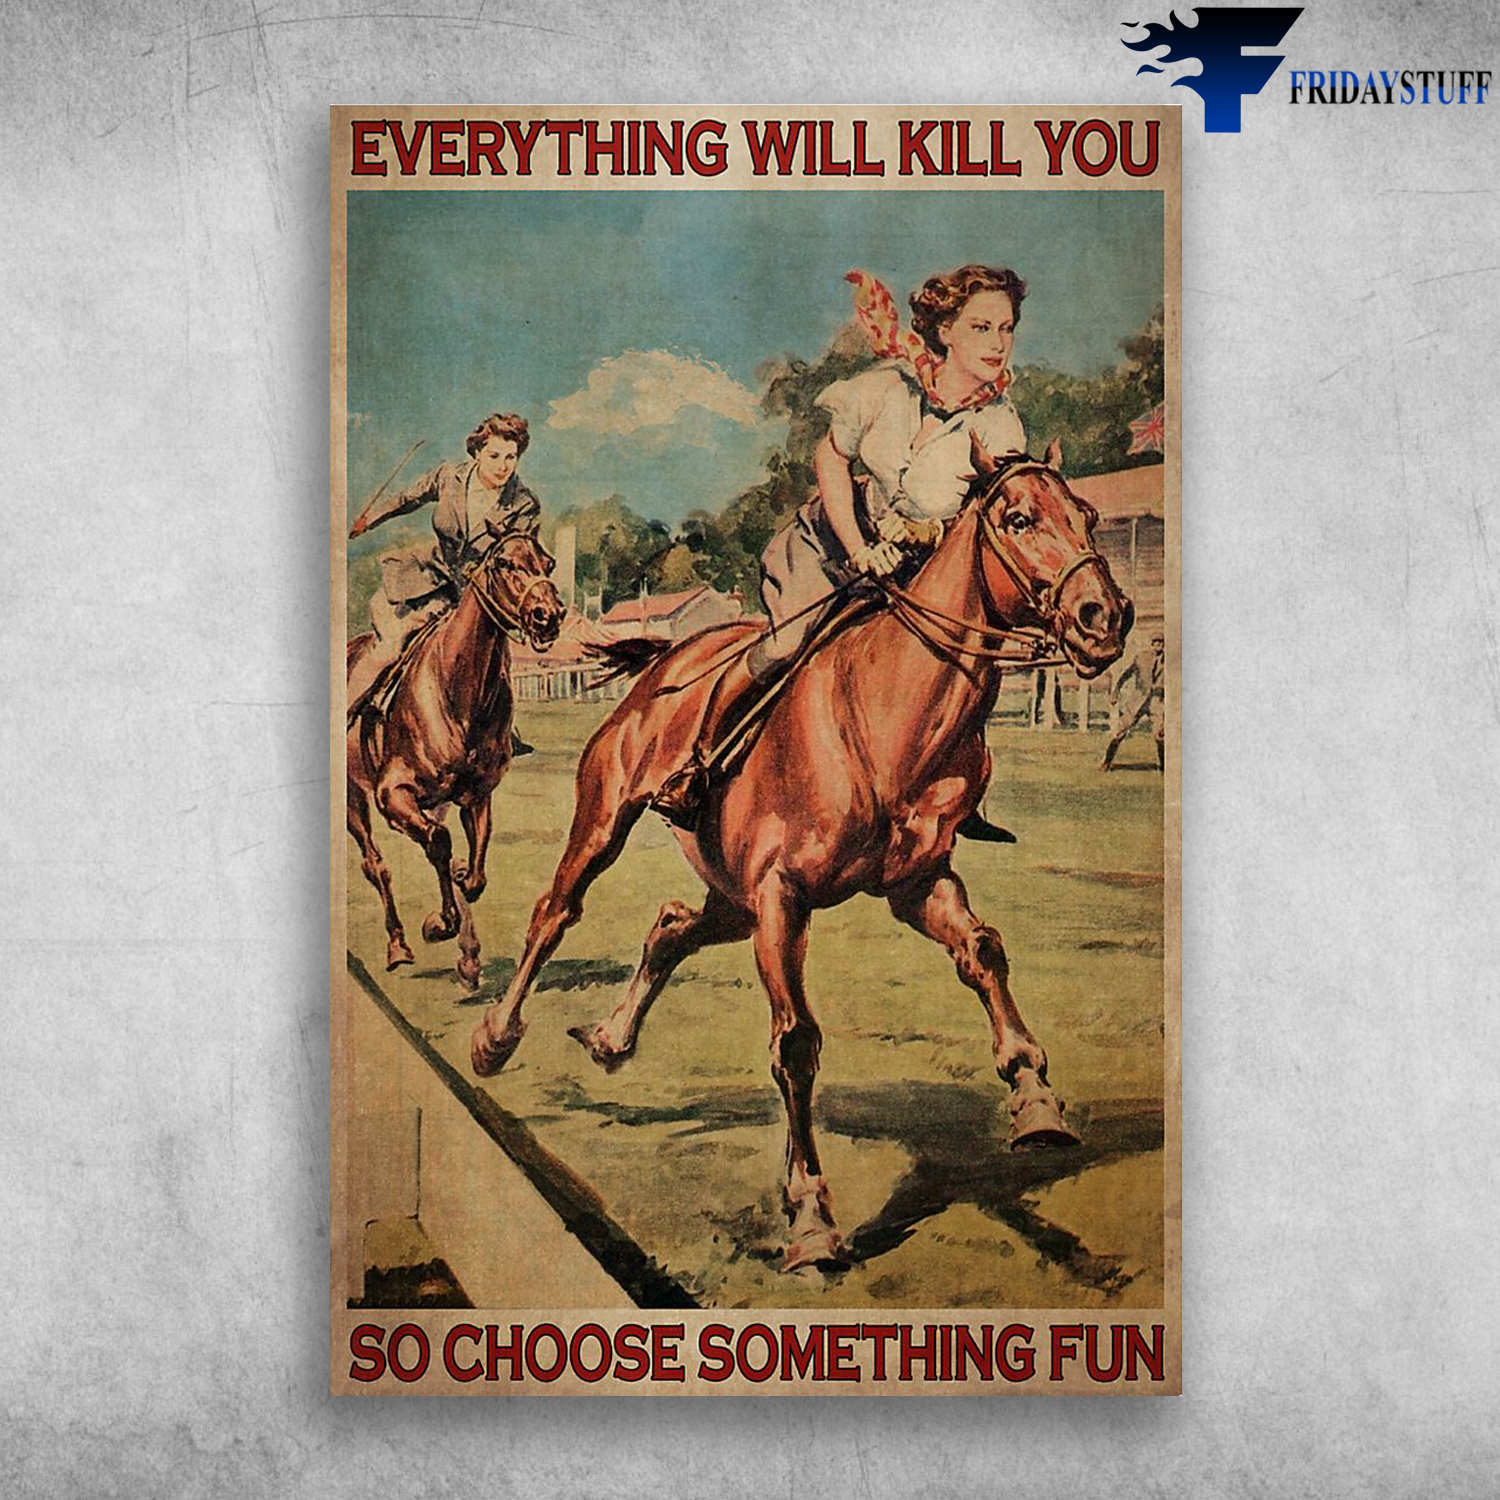 Two Girls Are Riding The Horse - Everything Will Kill You So Choose Something Fun